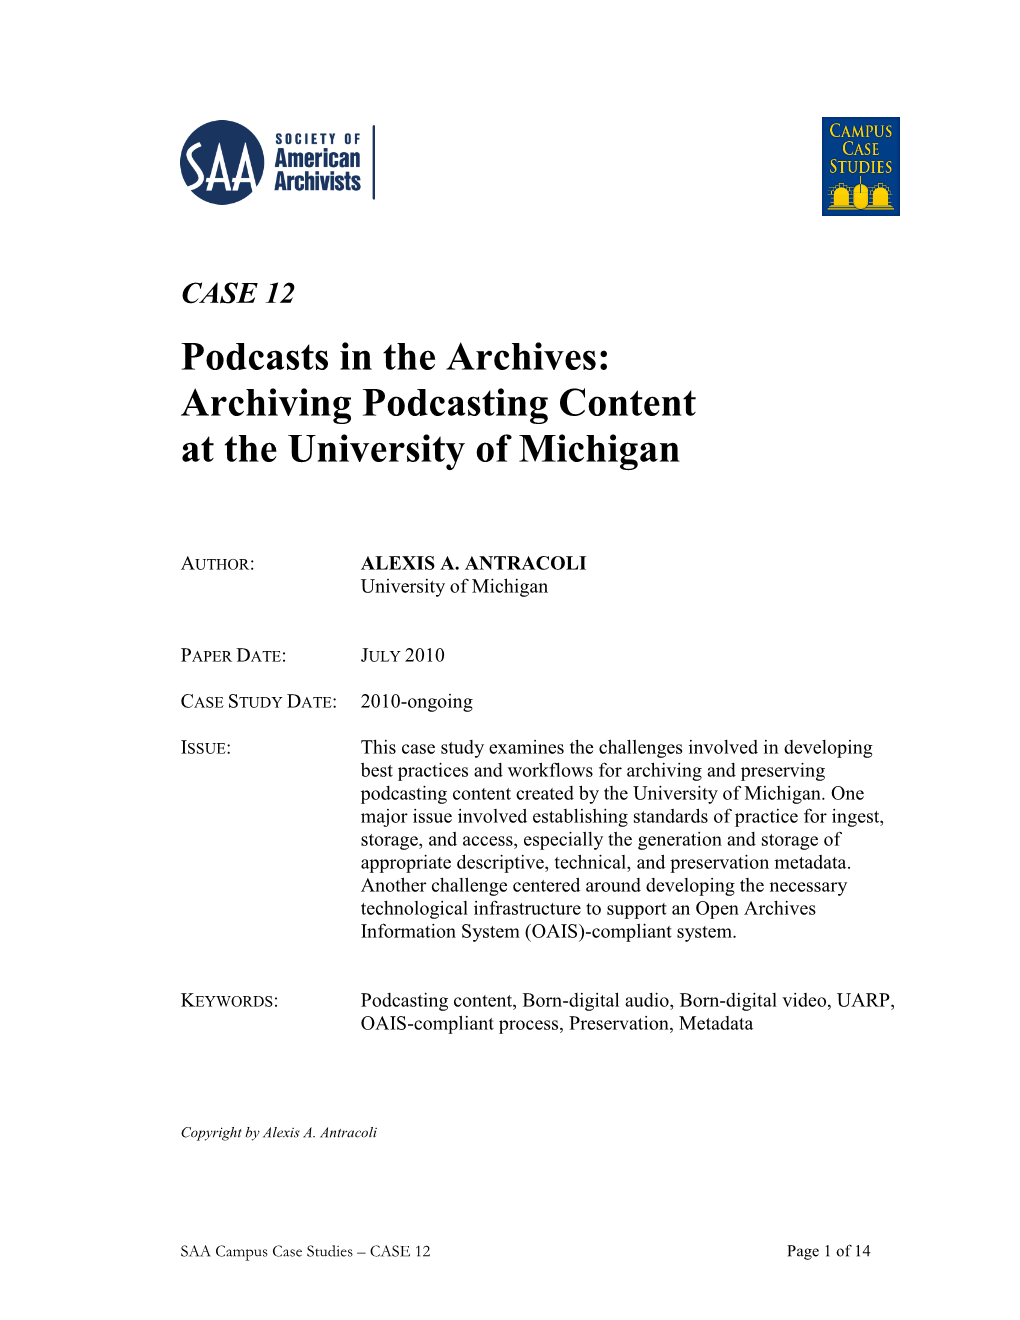 Archiving Podcasting Content at the University of Michigan